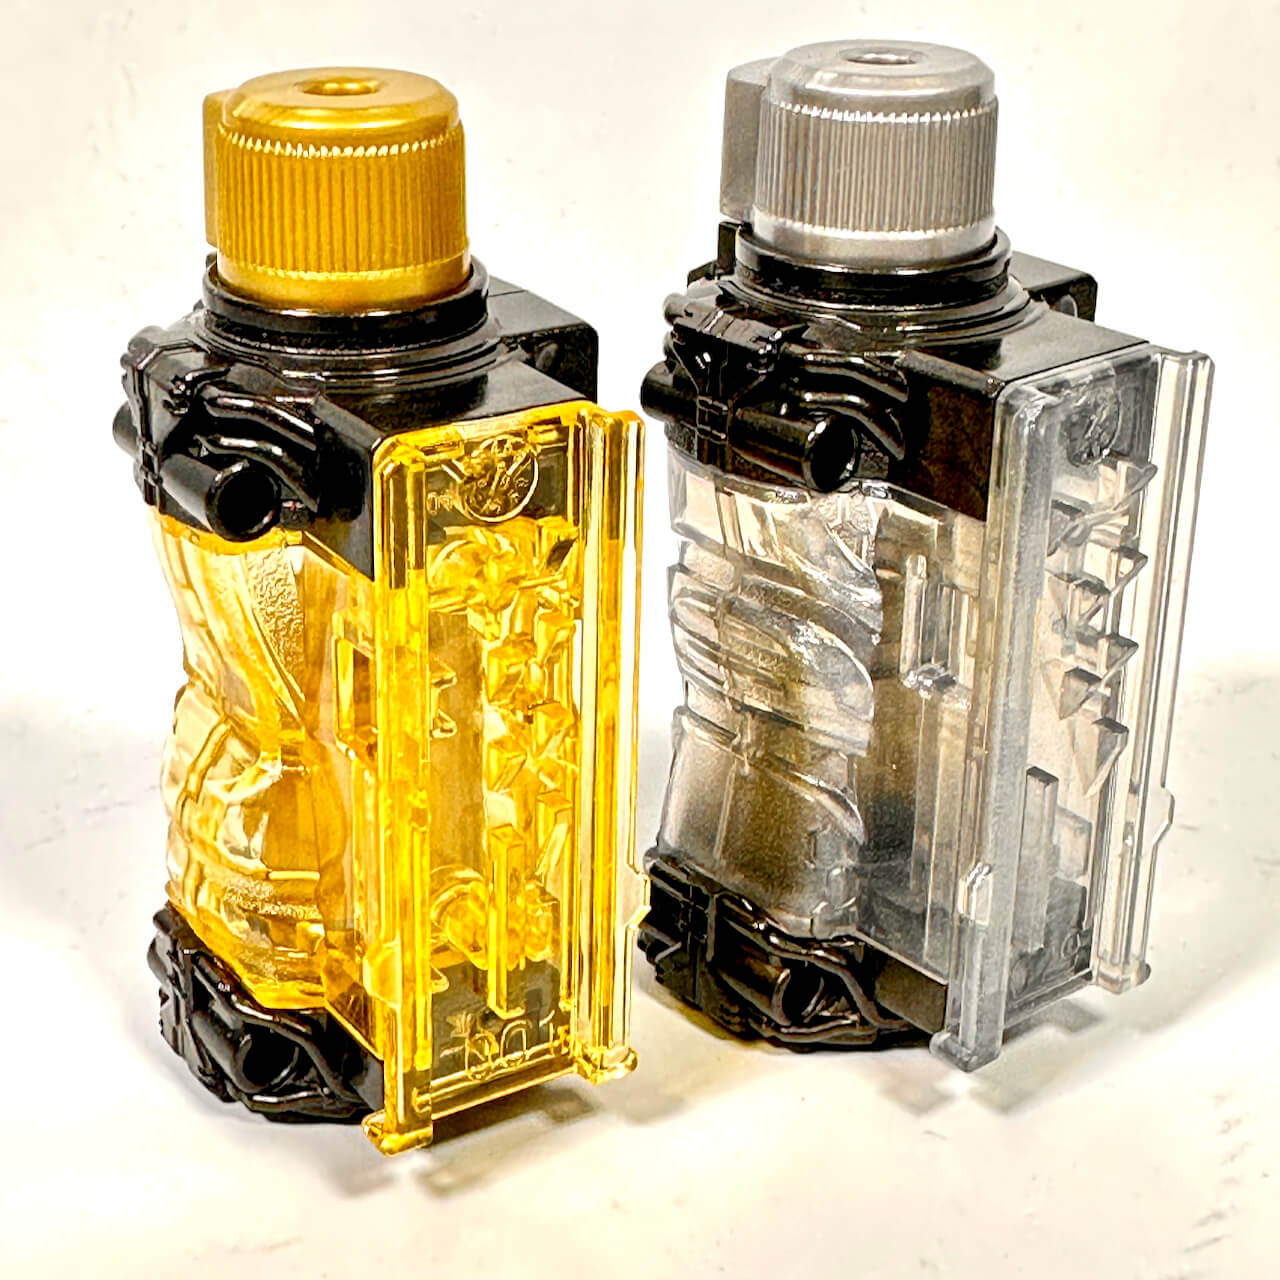 [LOOSE] Kamen Rider Build: DX Gold Rabbit & Silver Dragon Full Bottle Set -"Be The One" Movie Exclusive- | CSTOYS INTERNATIONAL